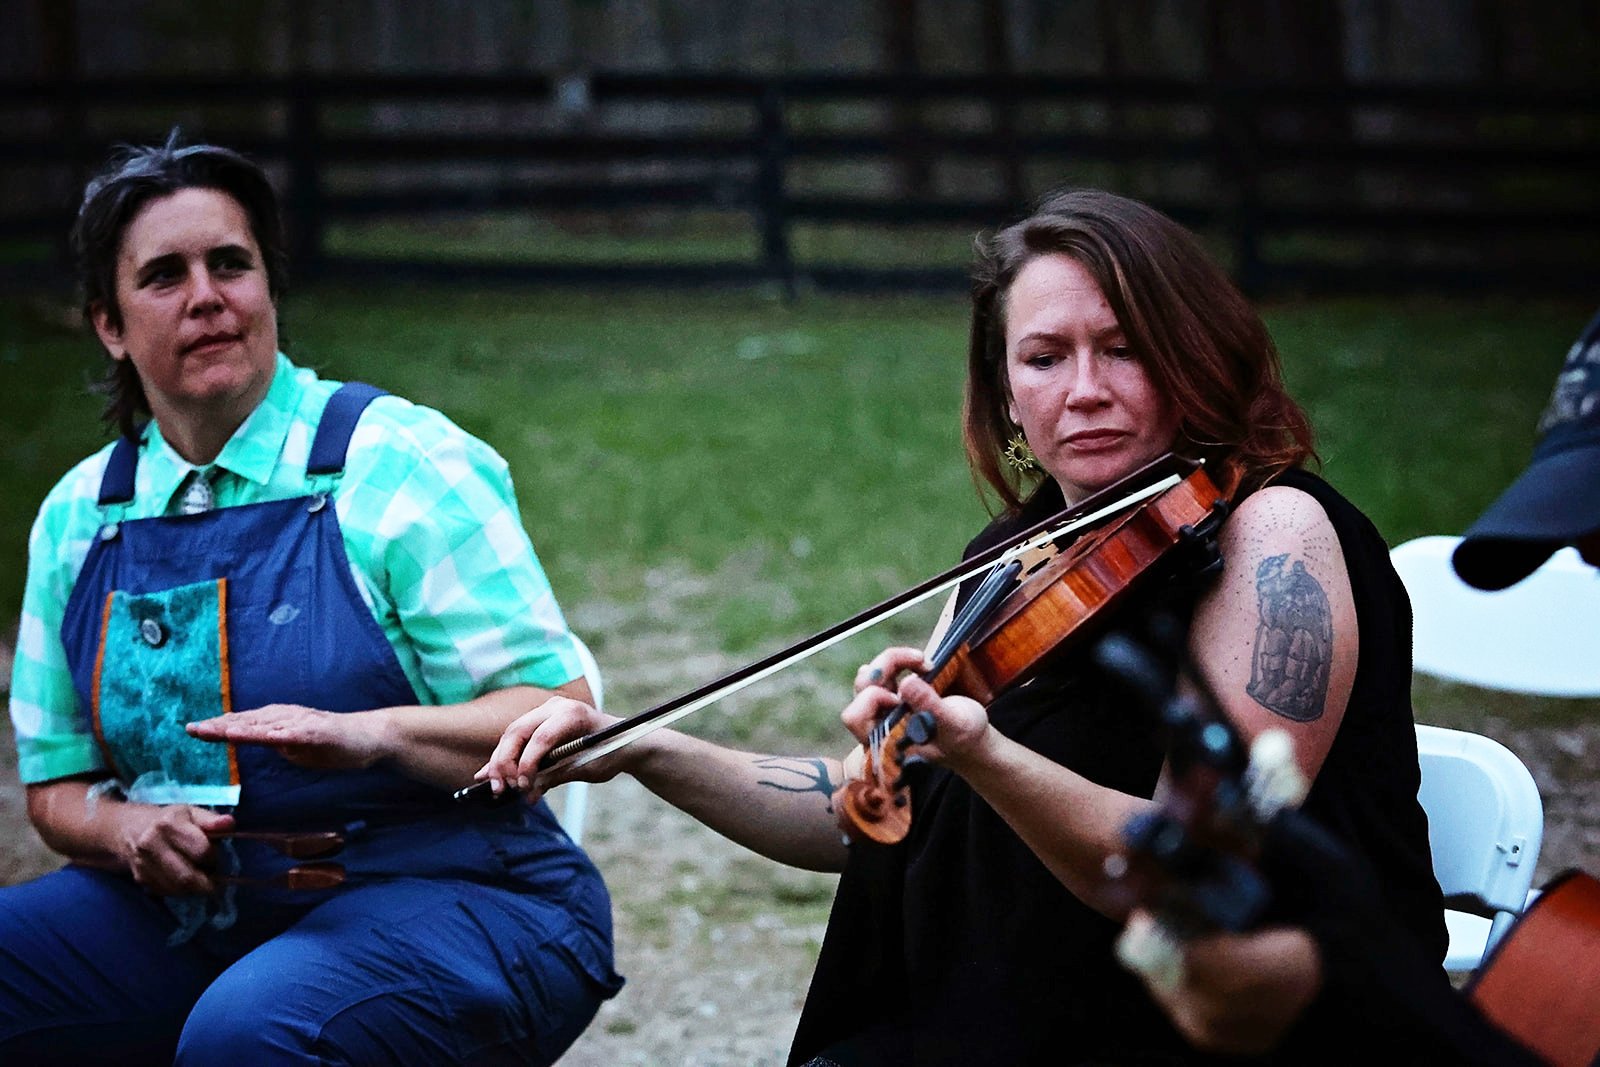  Singers &amp; musicians of Ezell: Ballad of a Land Man. Nicole Garneau and Anna Harrod, Berea College Forestry Center, March 2022. Photo: Erica Chambers.    